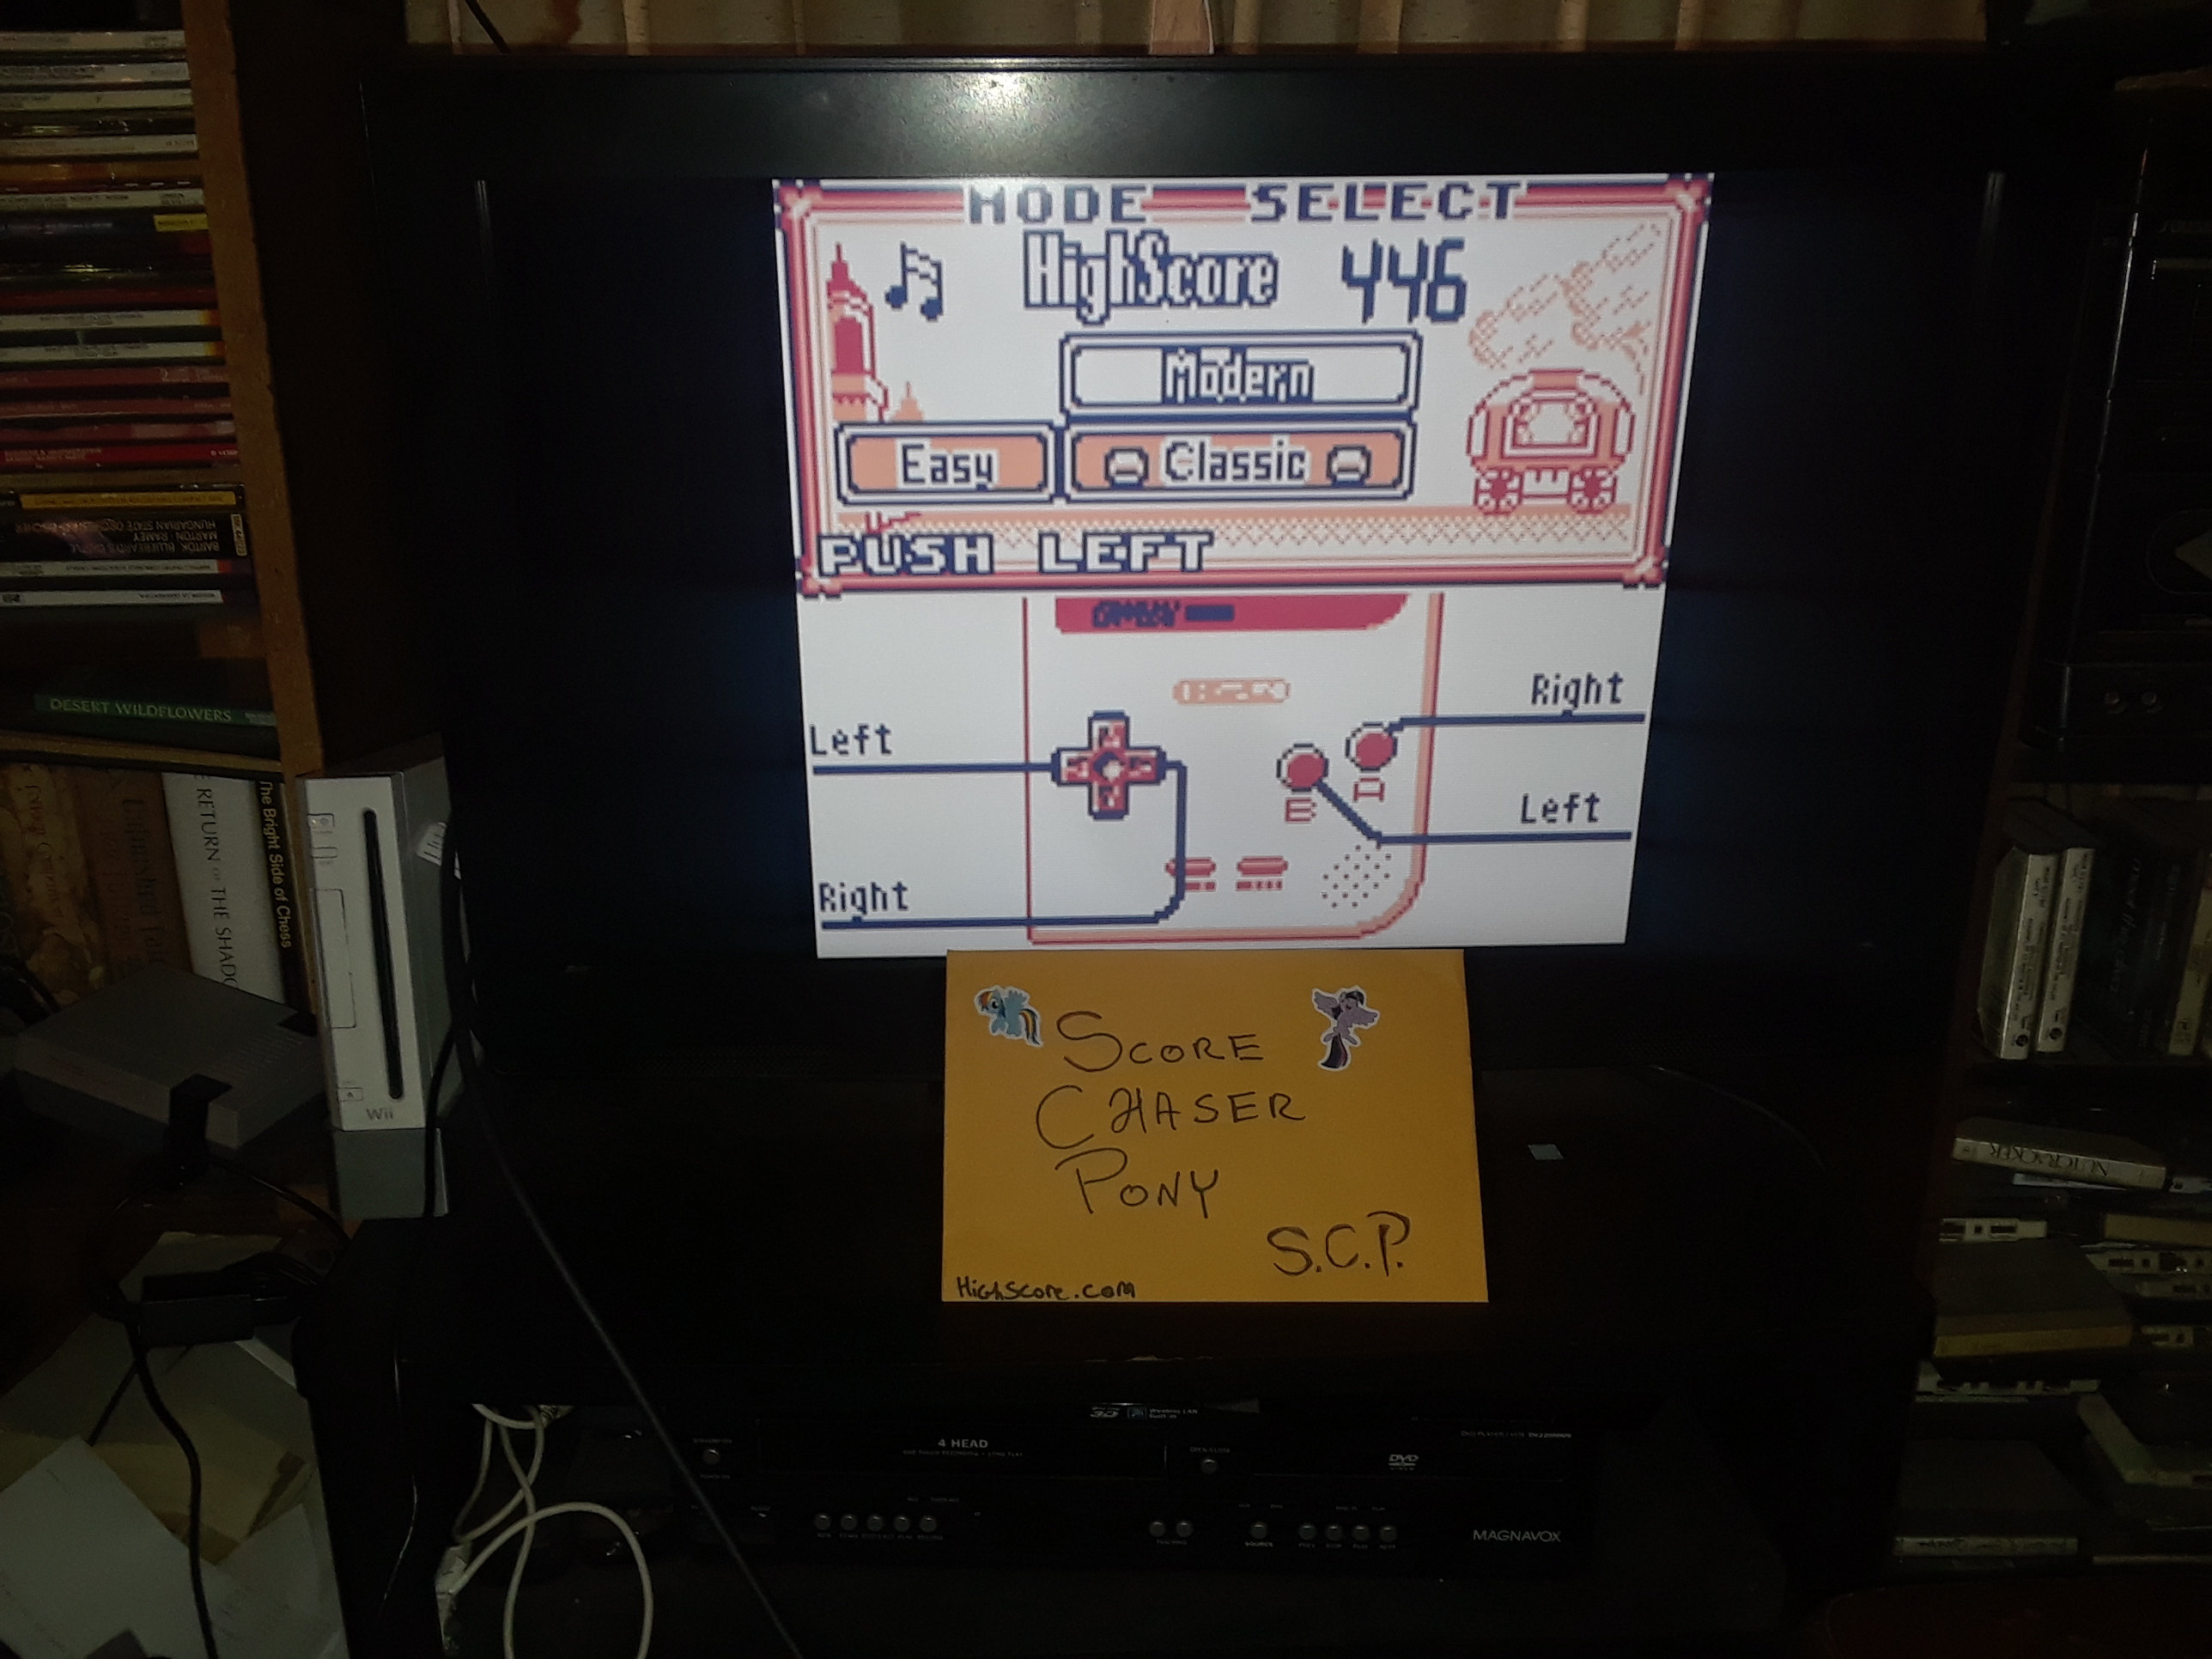 Scorechaserpony: Game & Watch Gallery: Fire [Classic: Easy] (Game Boy Emulated) 446 points on 2019-06-01 12:09:51